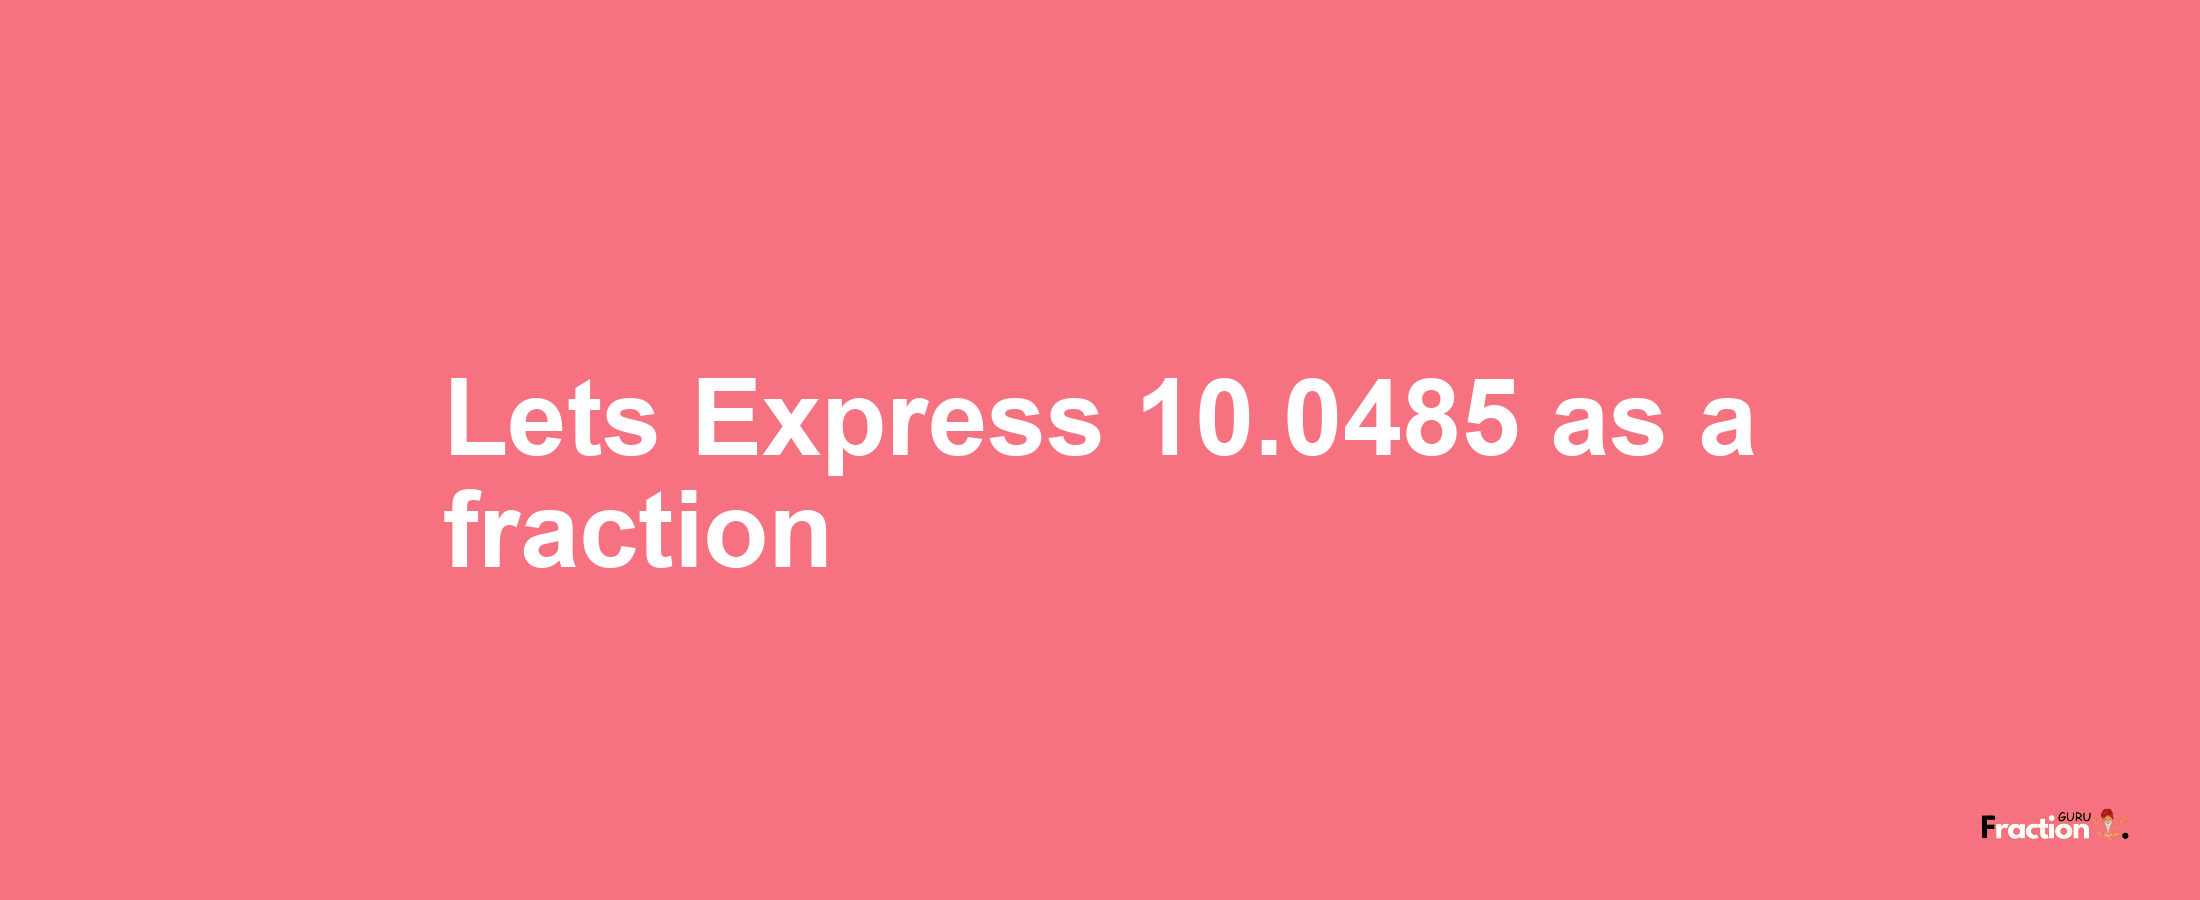 Lets Express 10.0485 as afraction